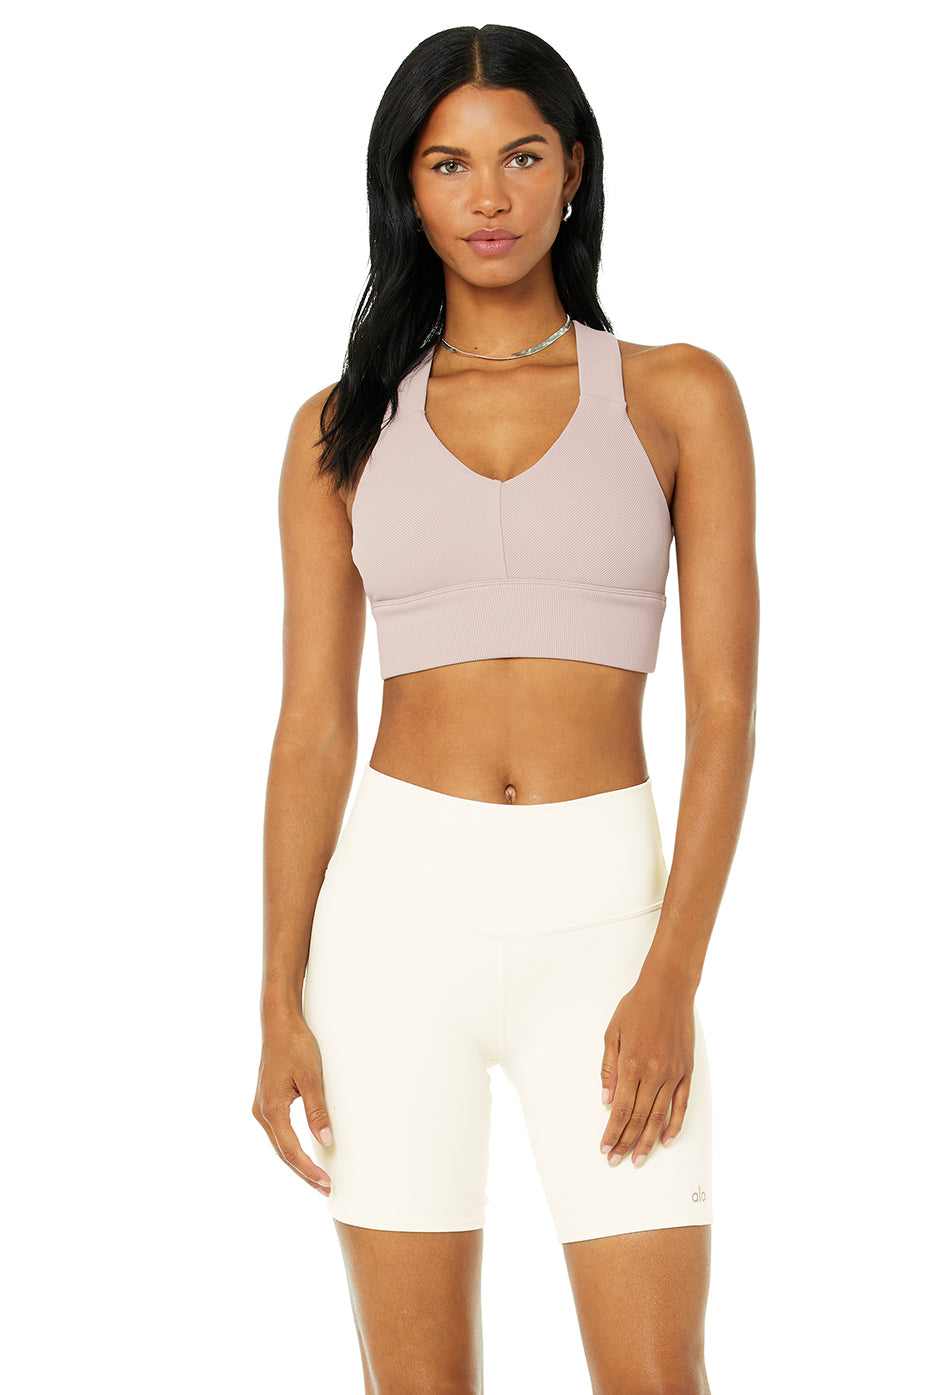 Alo Yoga Movement Sports Bra Crop Top Lace Up Dusty Rosewood Earth